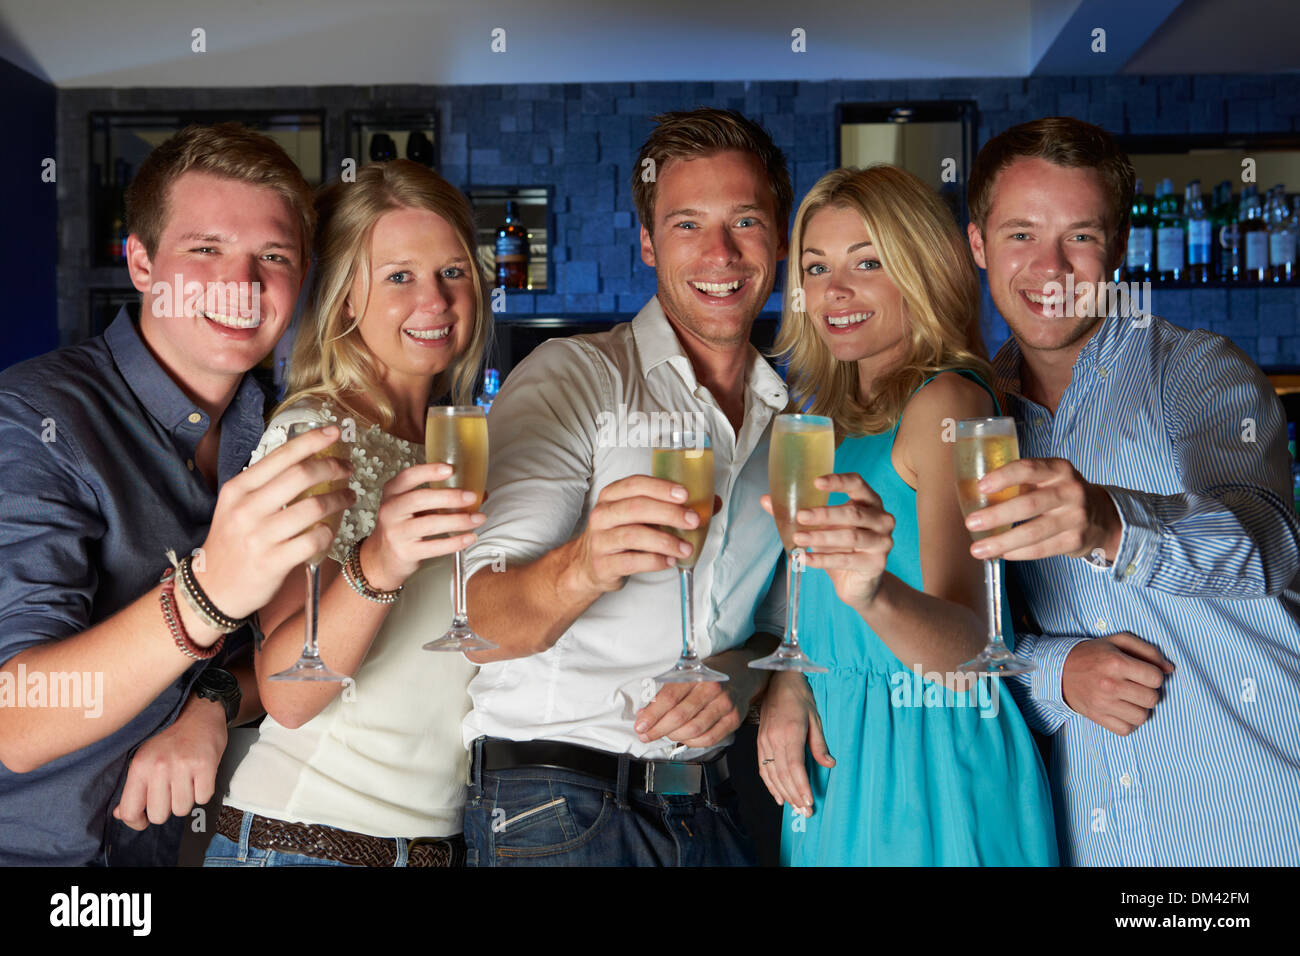 Group Of Friends Enjoying Glass Of Champagne In Bar Stock Photo